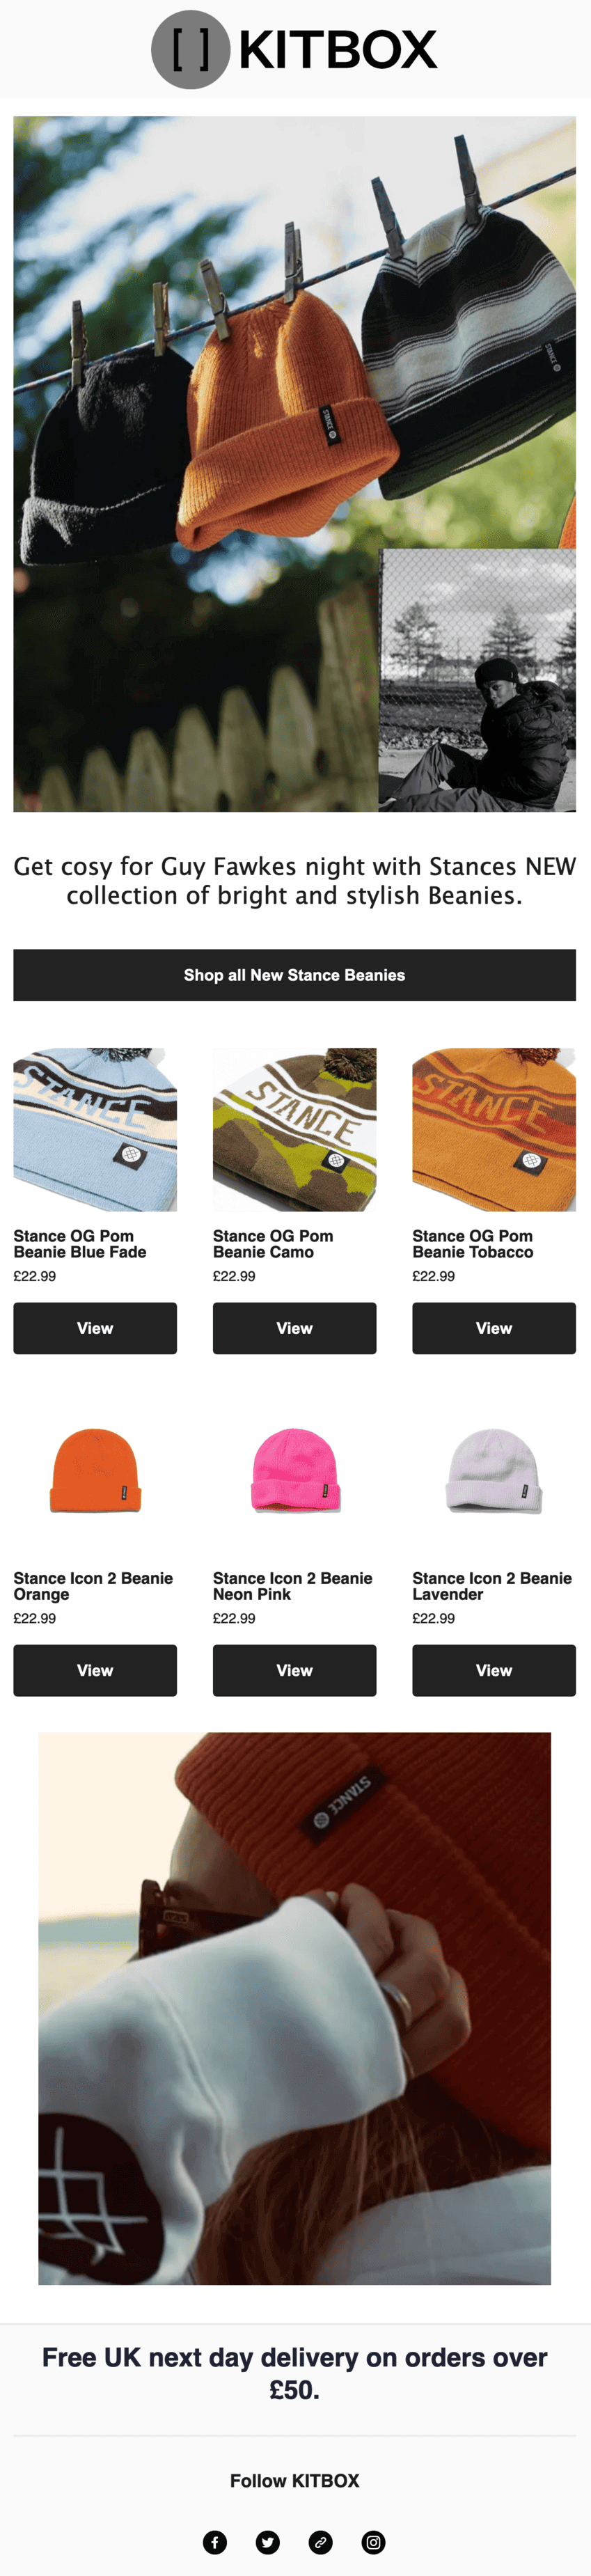 An email promoting a new collection of beanies to celebrate Guy Fawkes Night